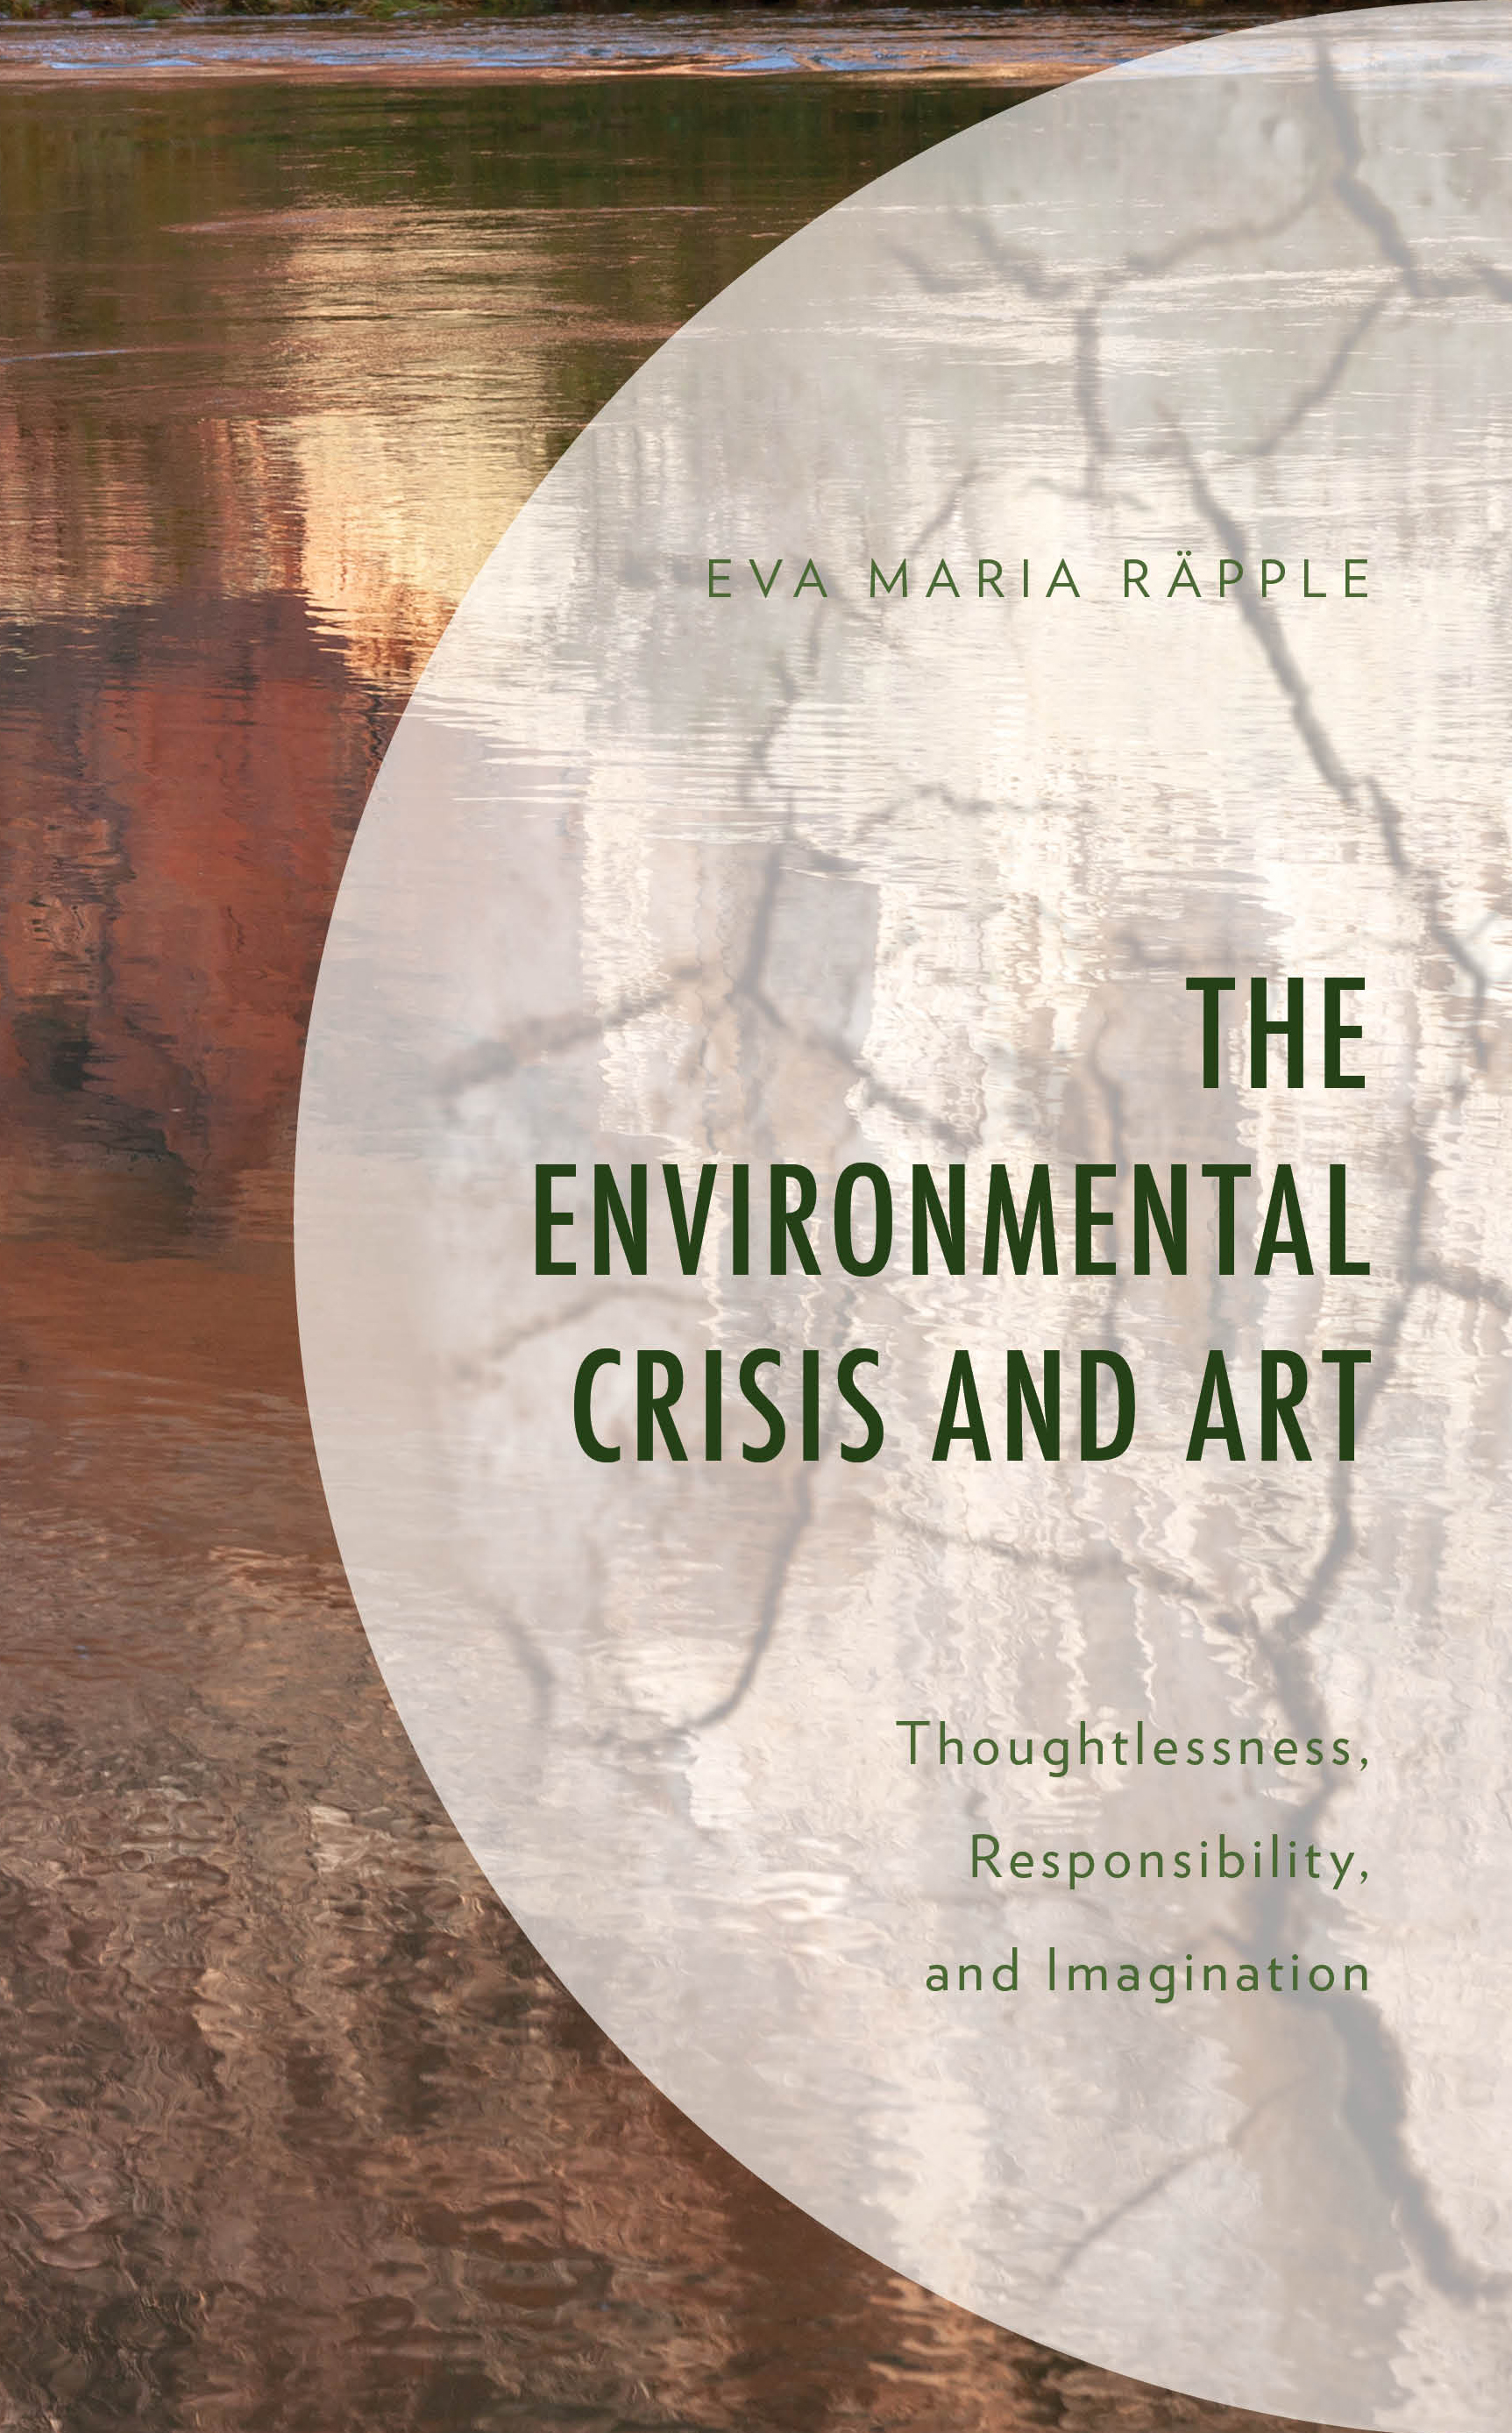 The Environmental Crisis and Art: Thoughtlessness, Responsibility, and Imagination